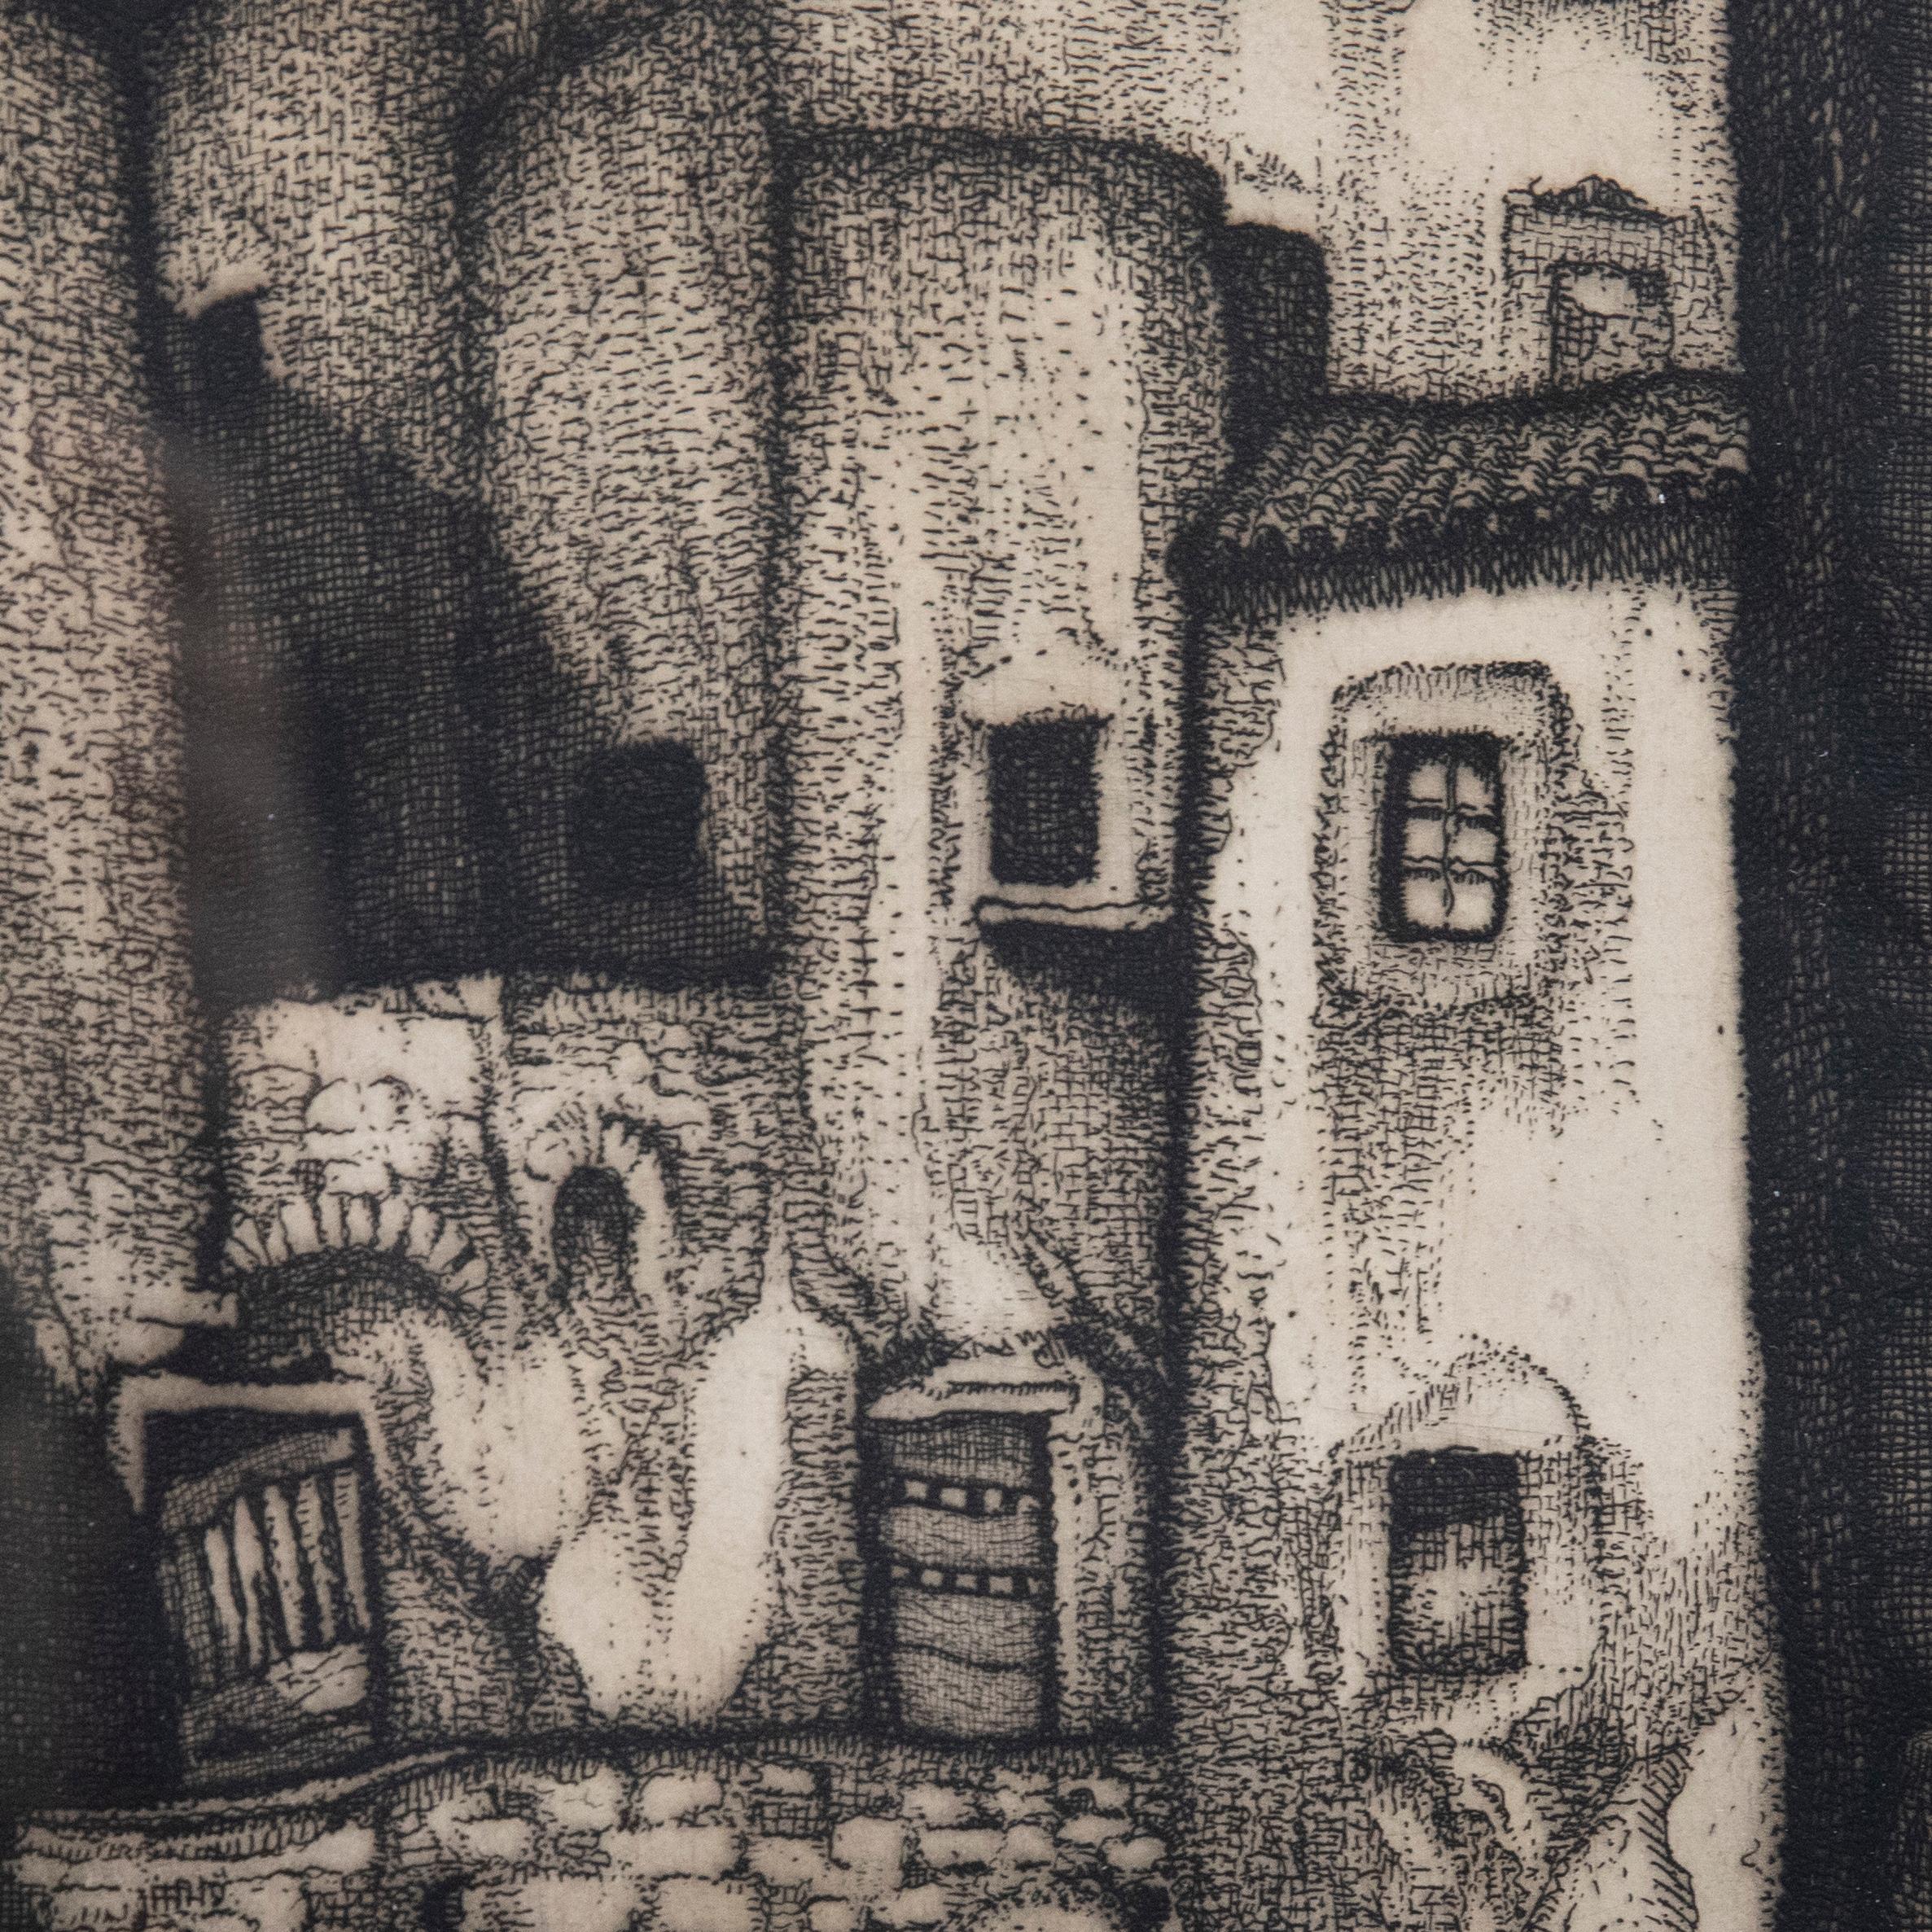 A charming depiction of a cafe in Pitigliano Tuscany. The artist captures. The winding staircases and narrow continental streets in bold, organic forms. Signed illegibly and titled below the pale line. 12/50. On paper. 